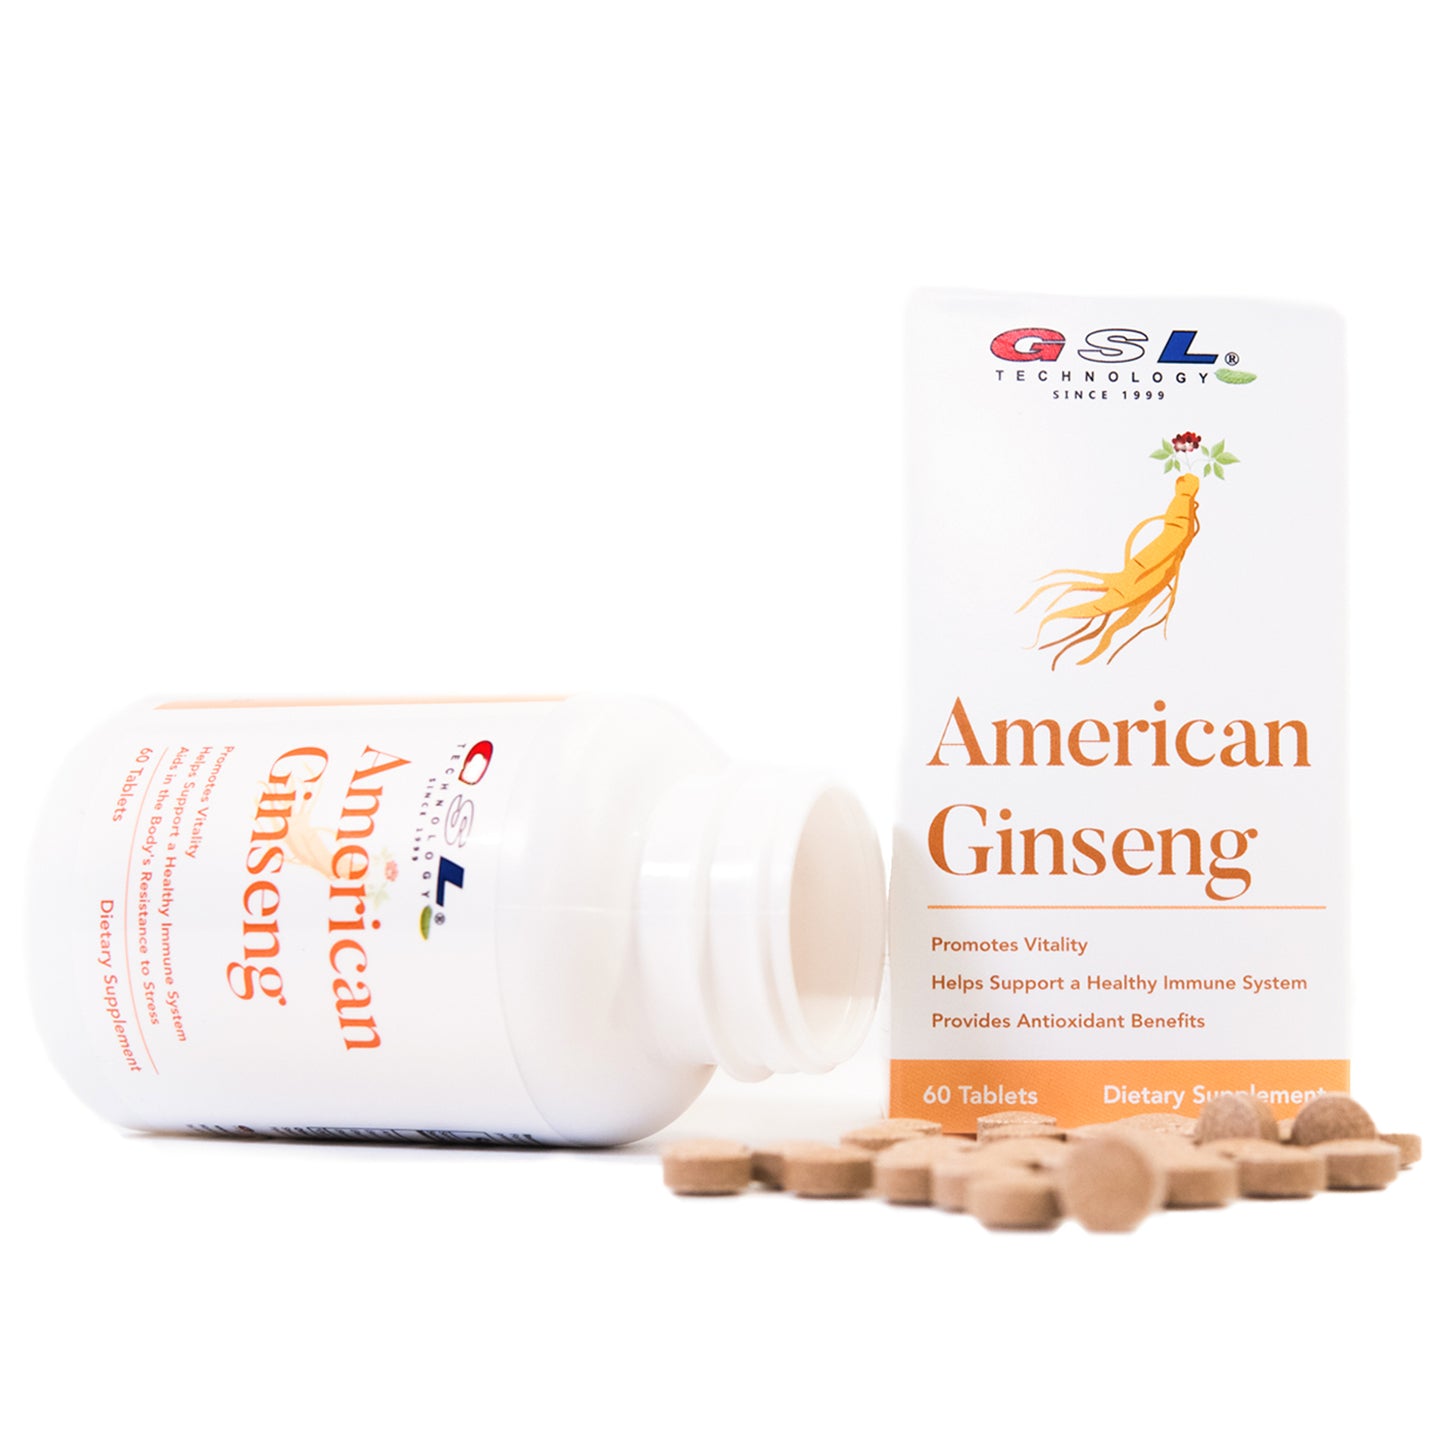 American Ginseng Extract | Extract Standardized to Contain 5% Ginsenosides | For Energy and Immune Health | Made in The USA